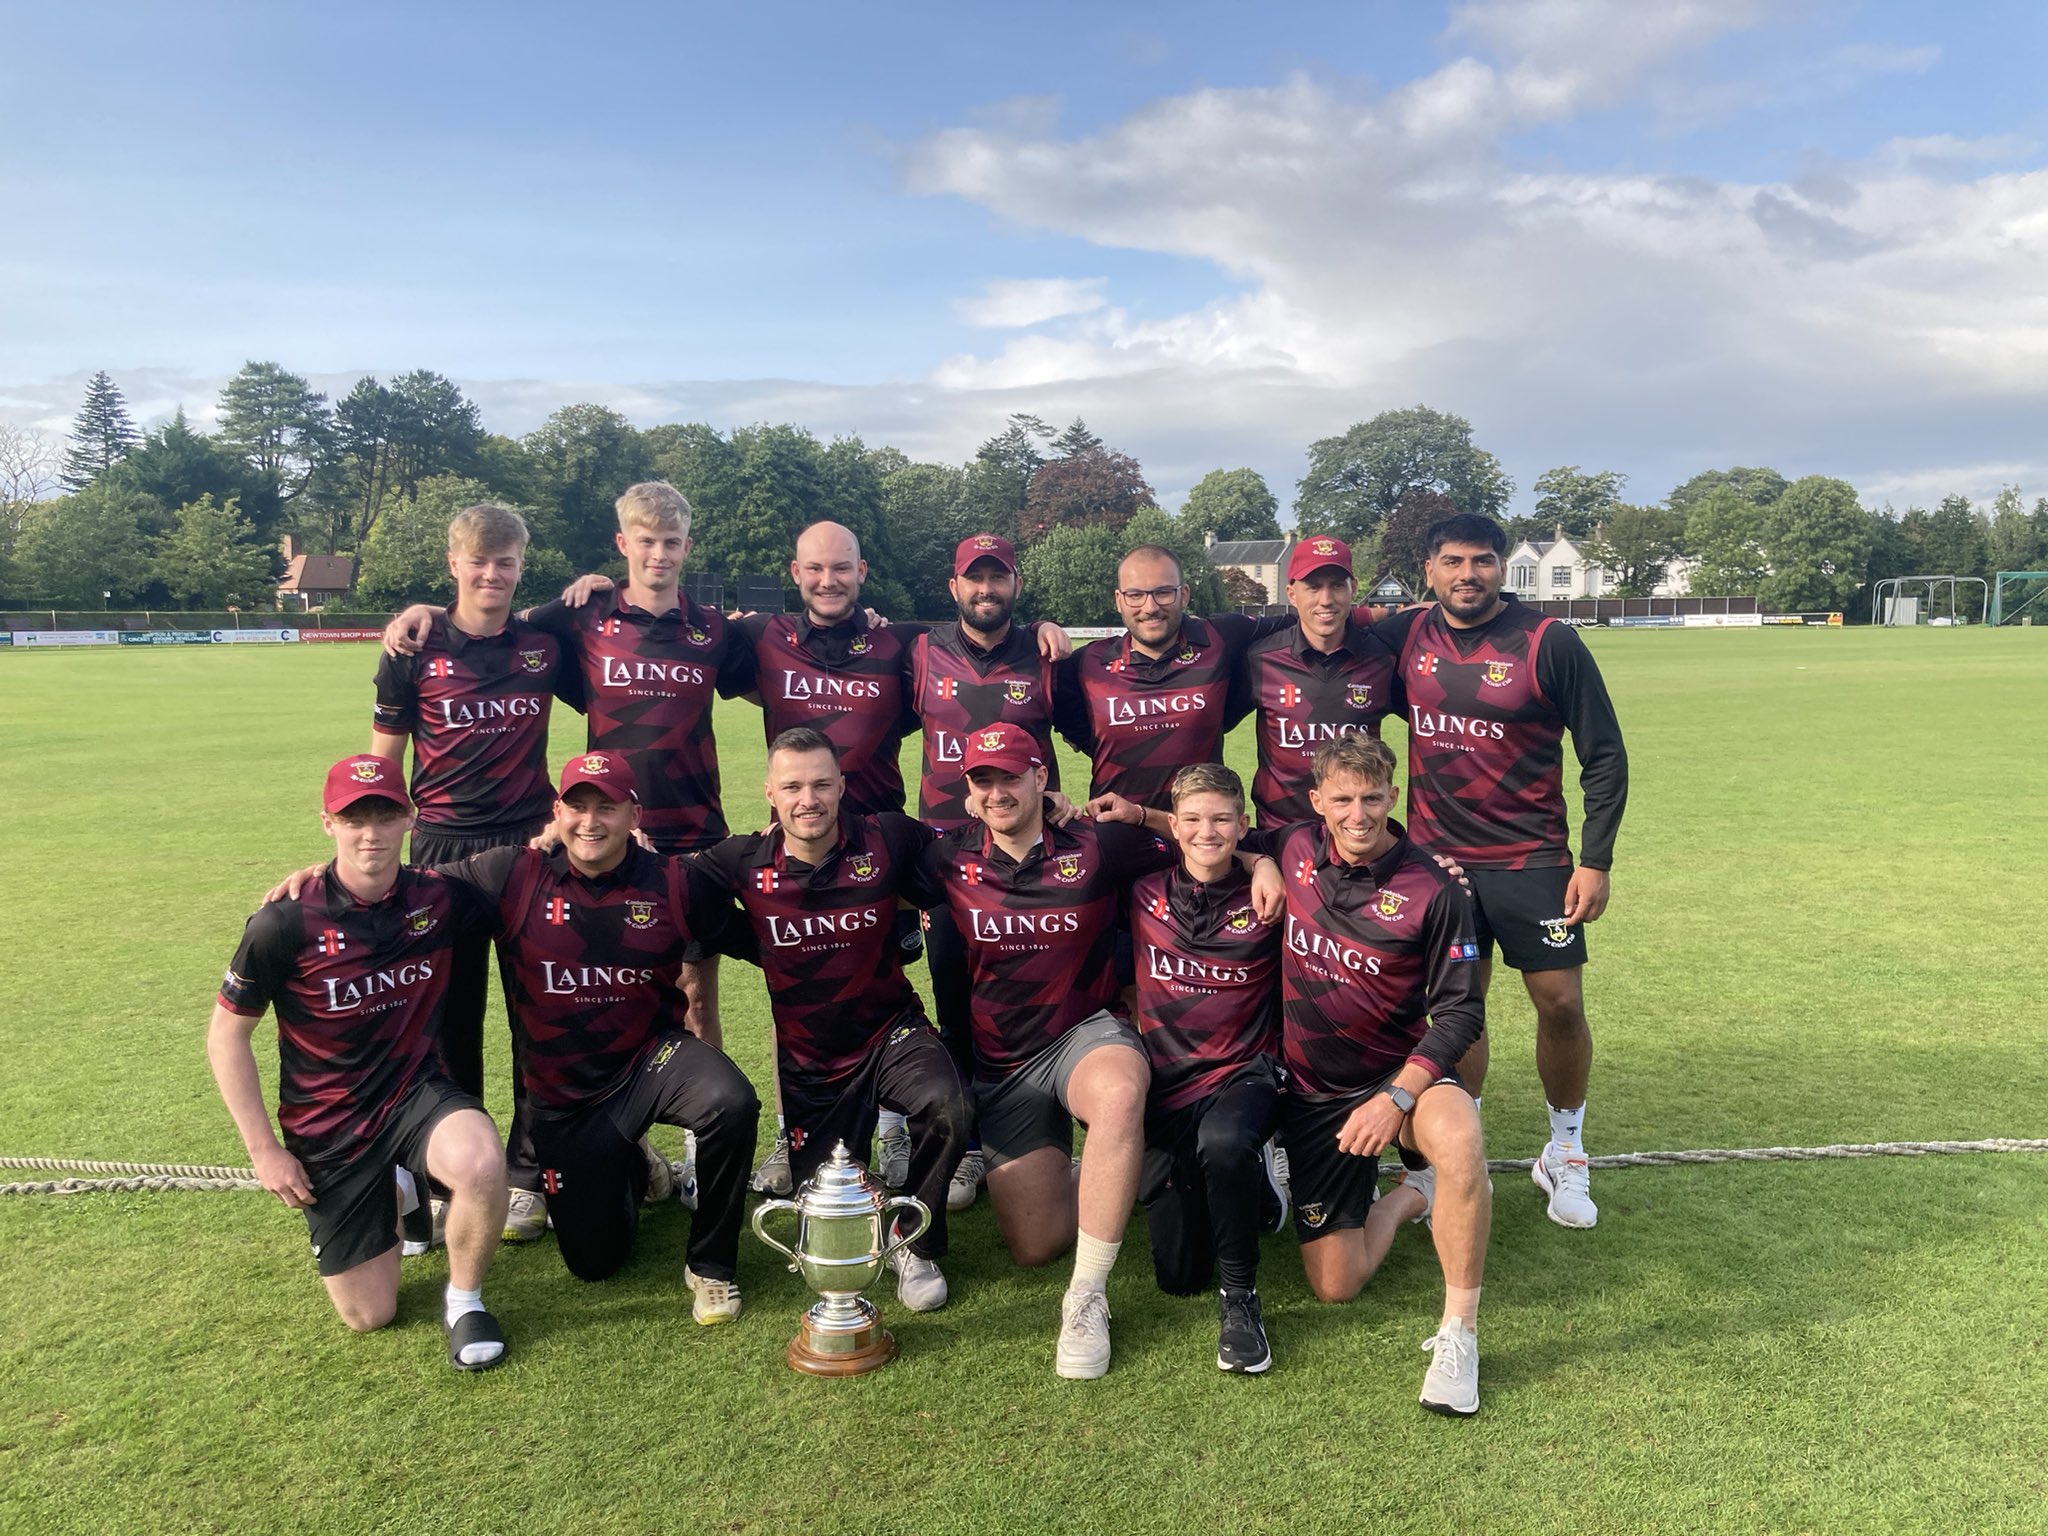 AYR AND GRANGE TO FIGHT IT OUT IN CRICKET SCOTLAND GRAND FINAL ...